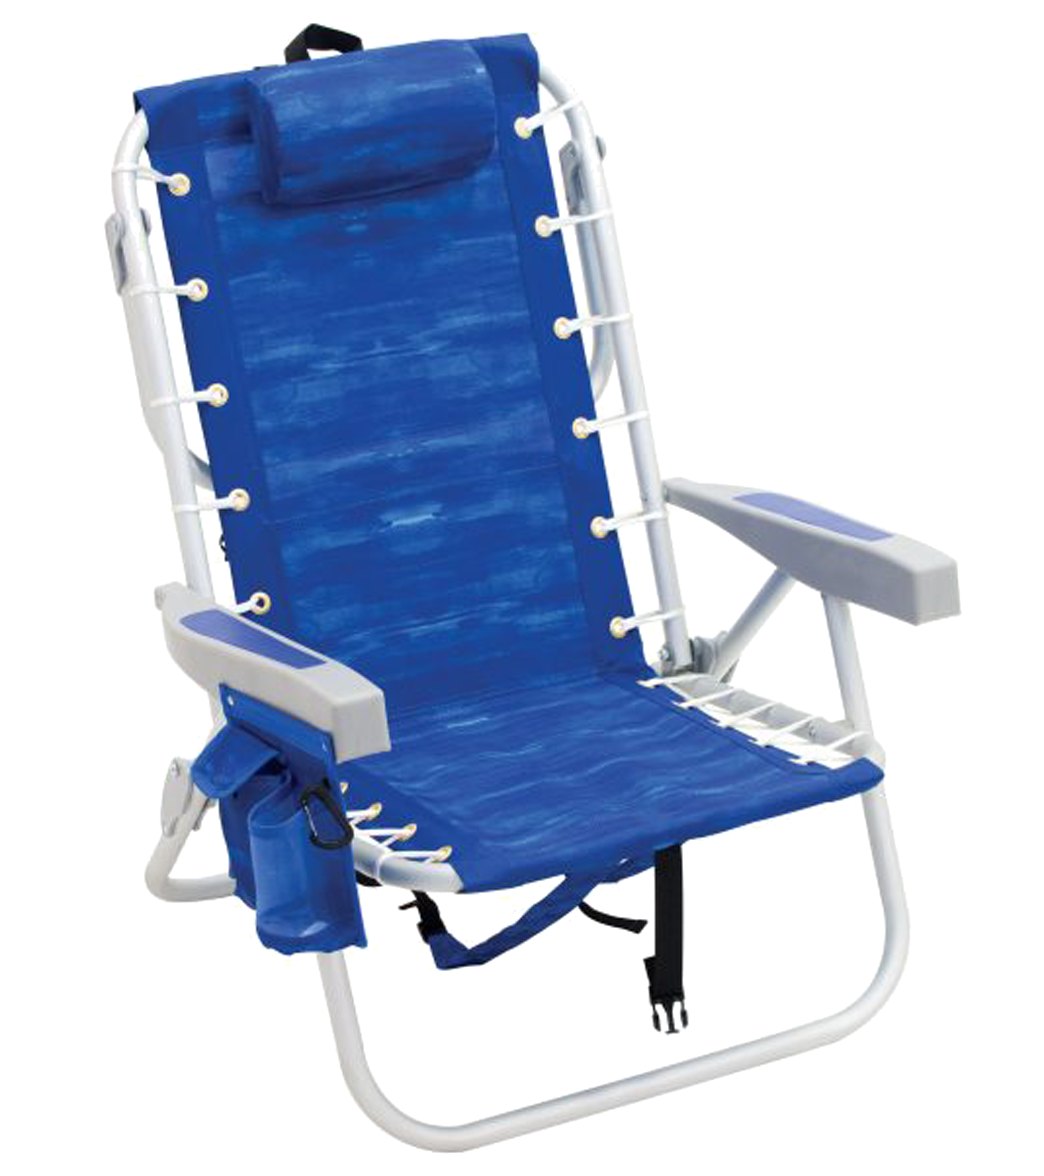 Unique How To Close A Rio Gear Beach Chair with Simple Decor